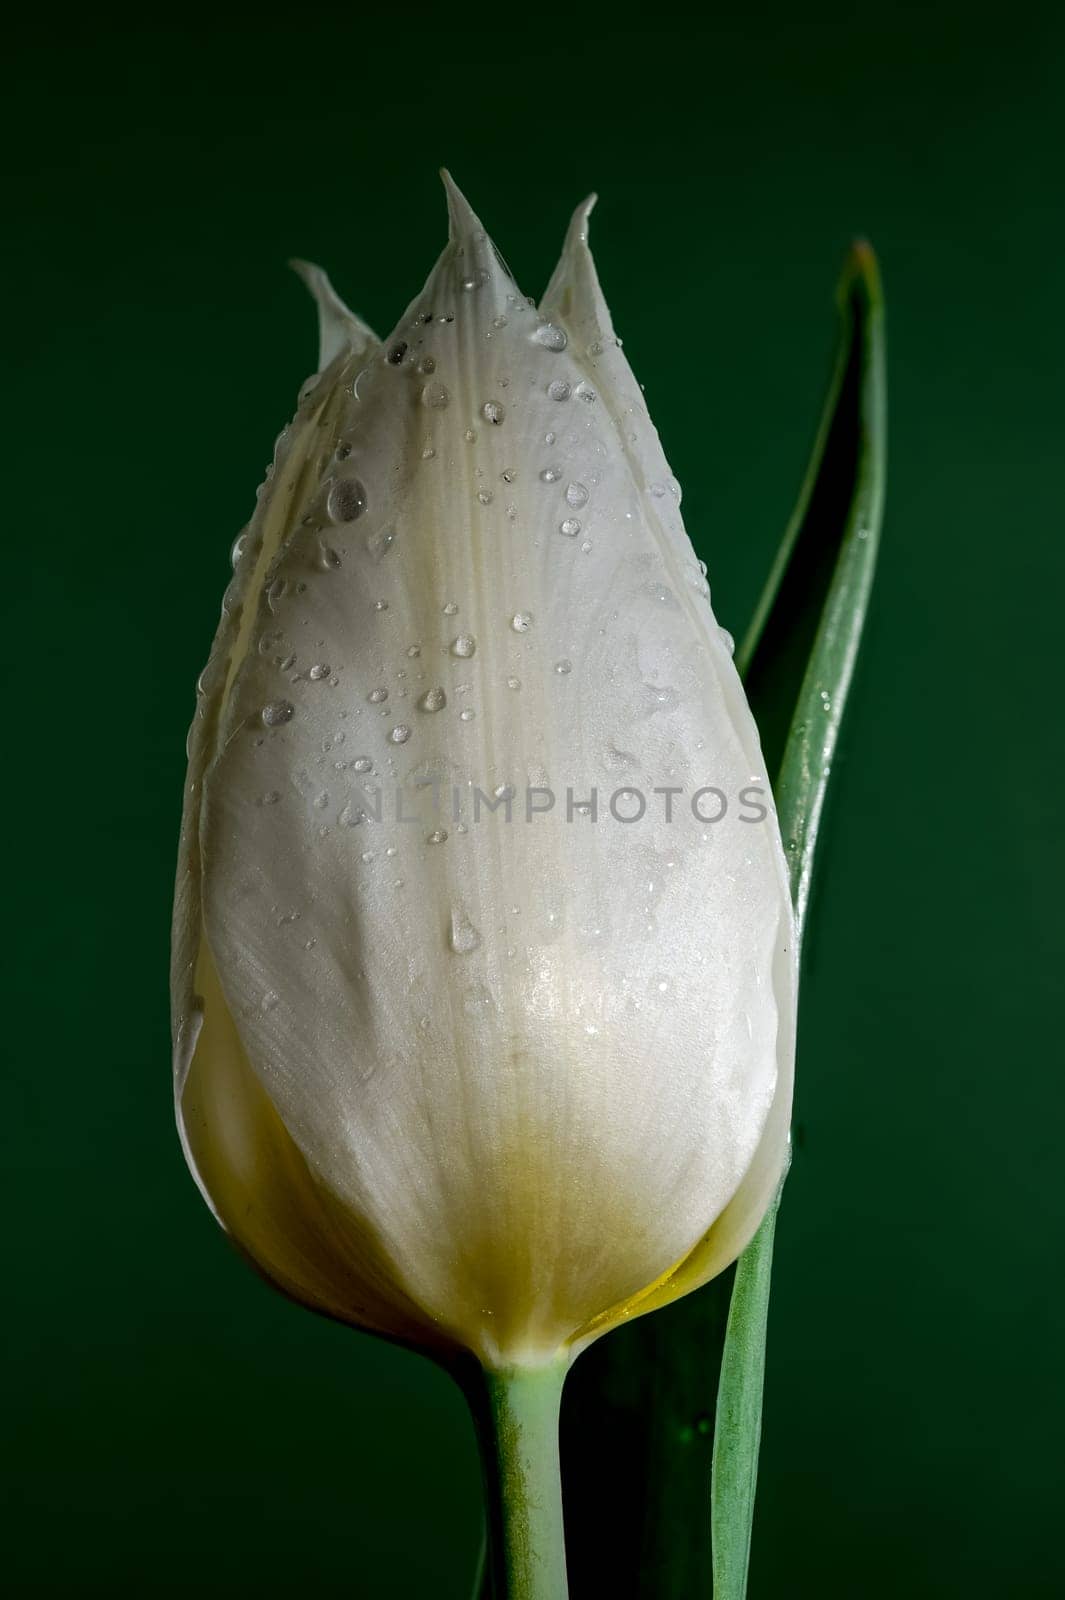 Beautiful Tulip white master flower on a green background. Flower head close-up.